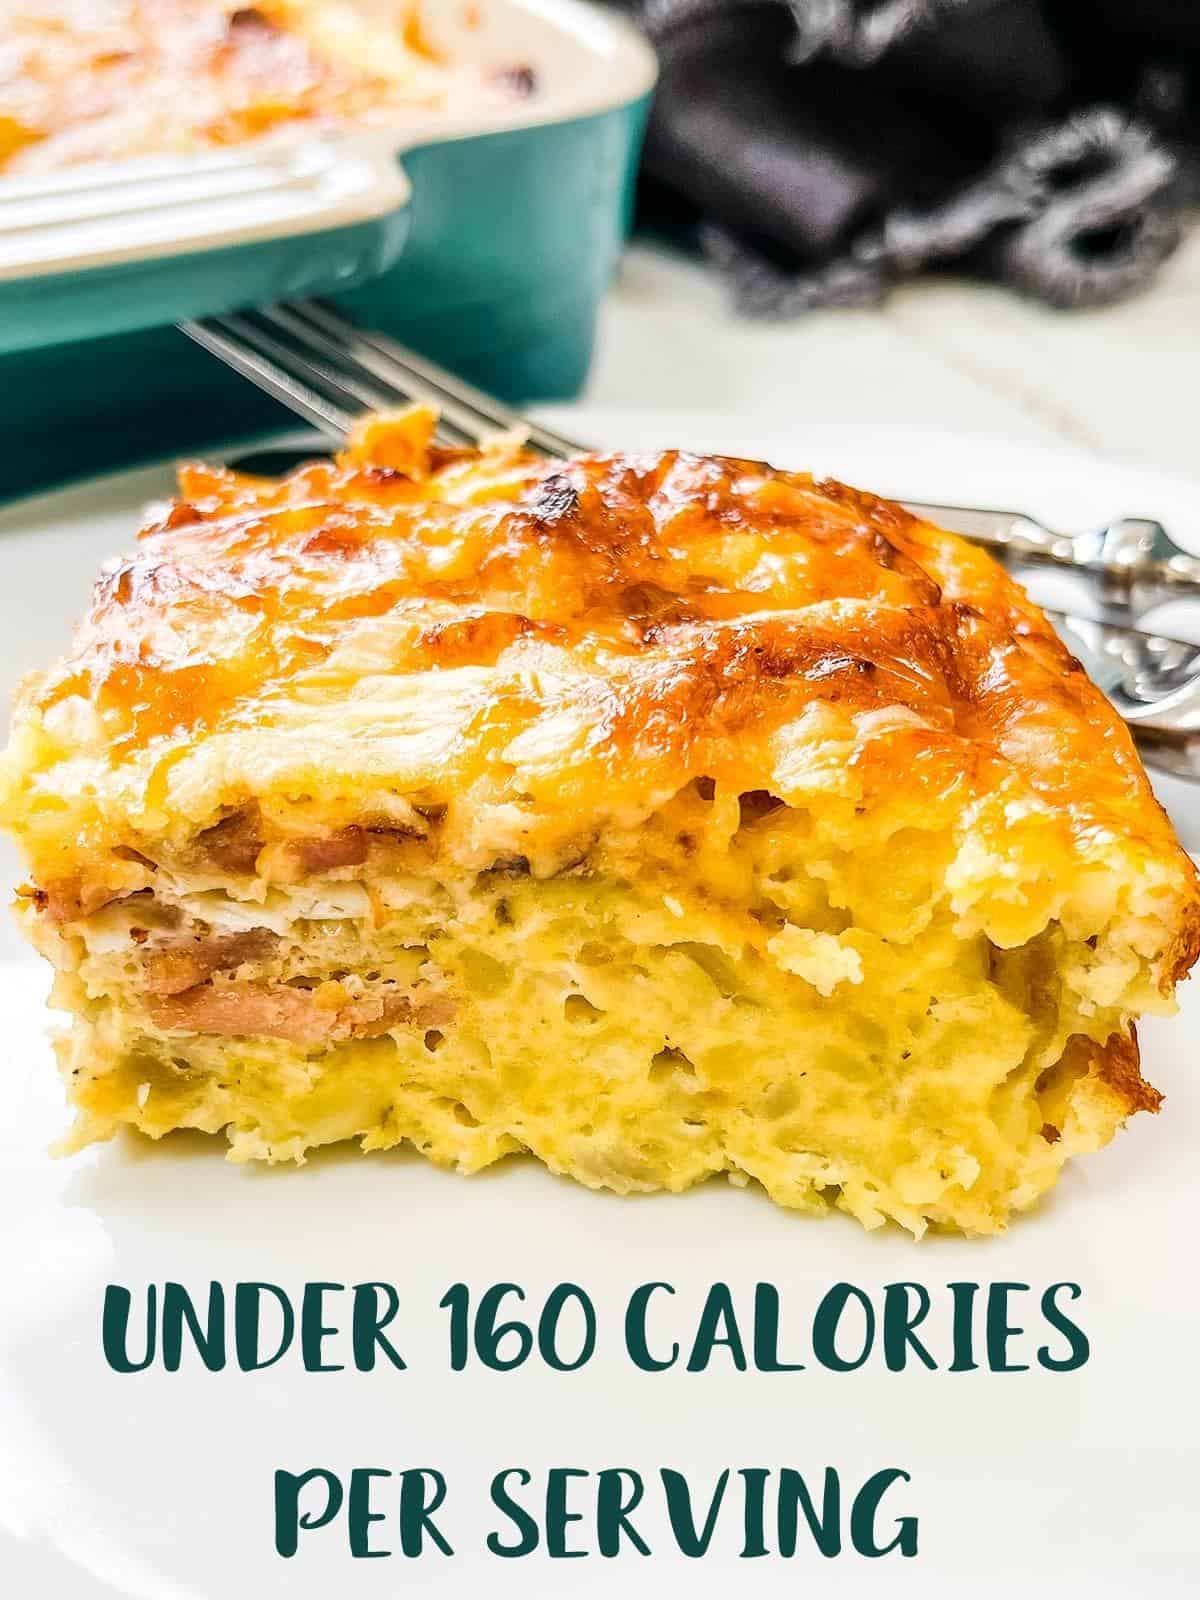 A close up picture of a slice of breakfast casserole with text overlay stating 'under 160 calories per serving'.